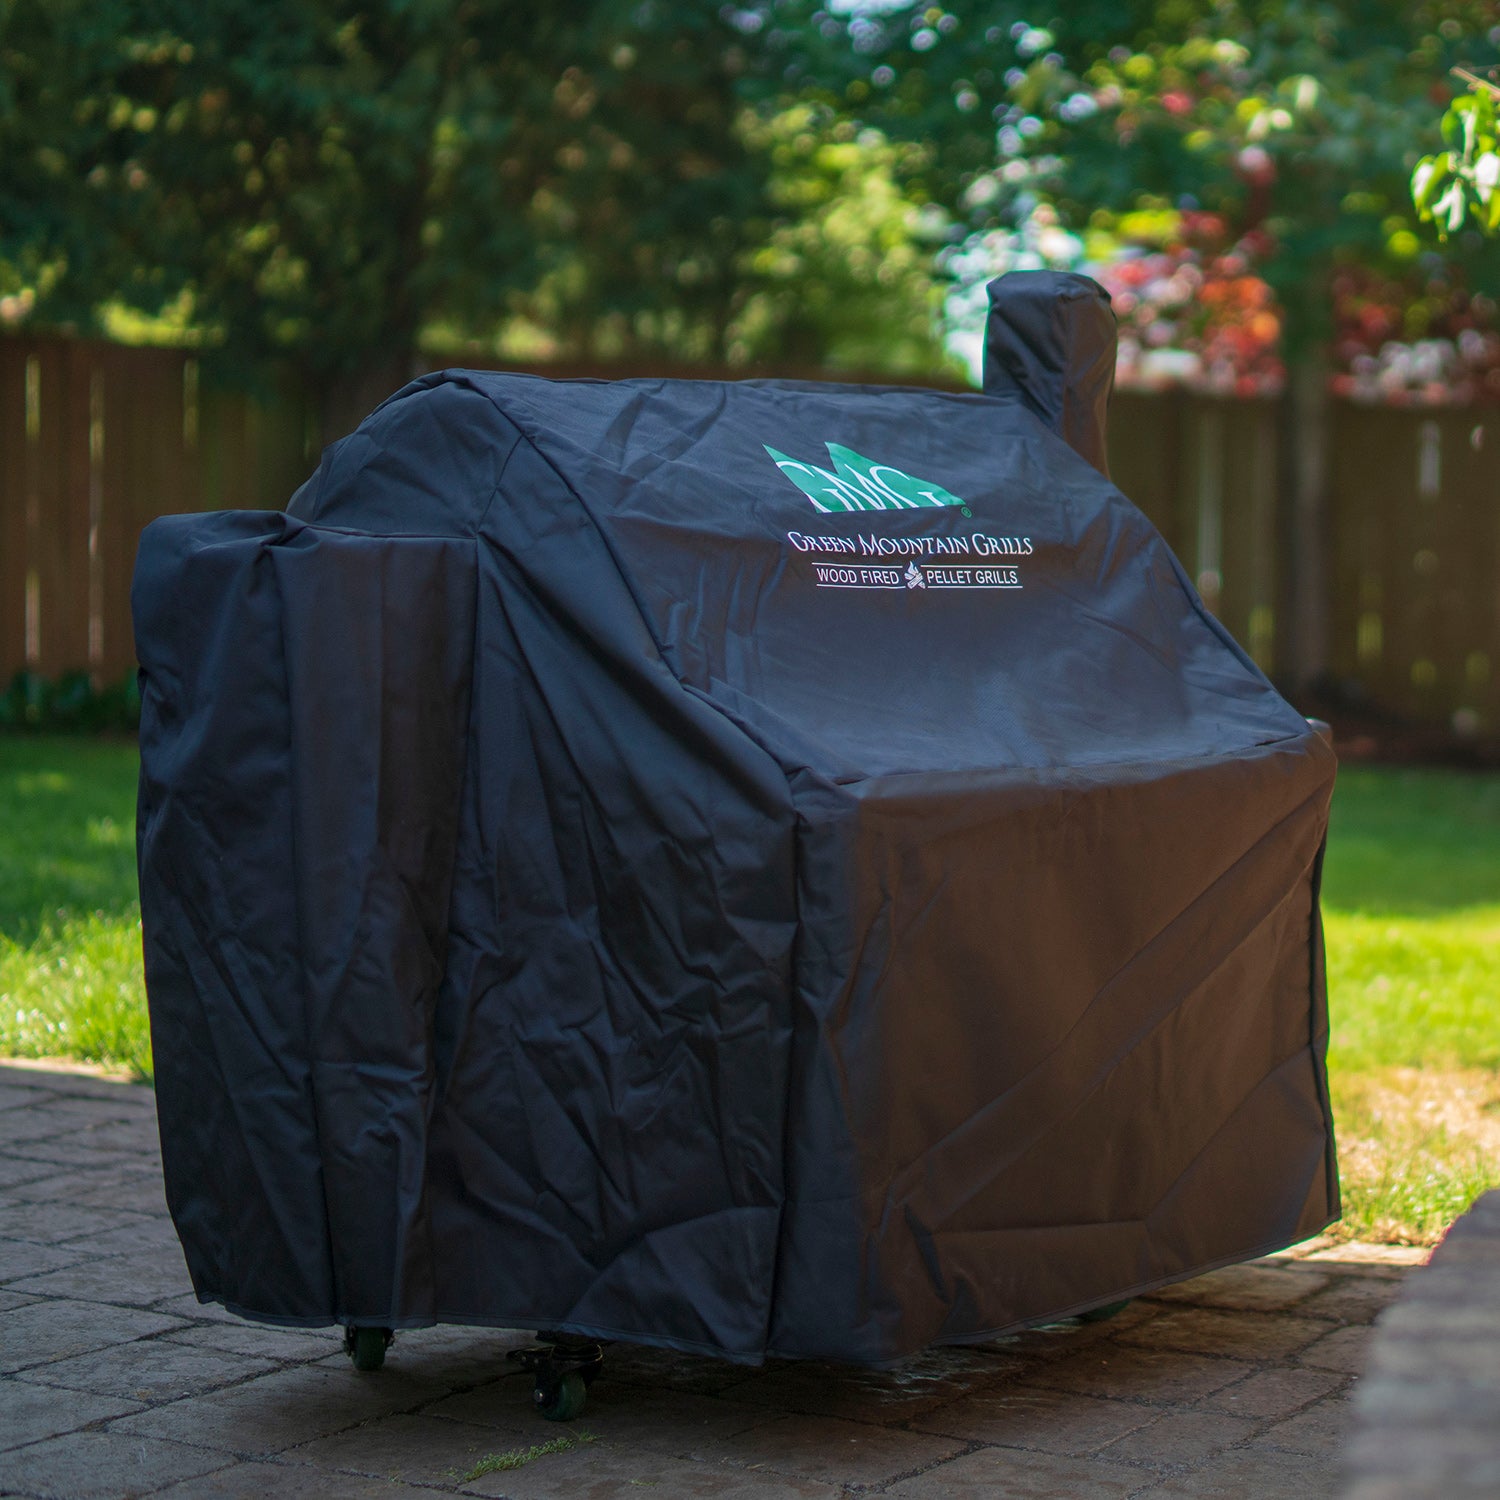 Green Mountain Grills Jim Bowie Prime WIFI 12V Durable Cover GMG-3004